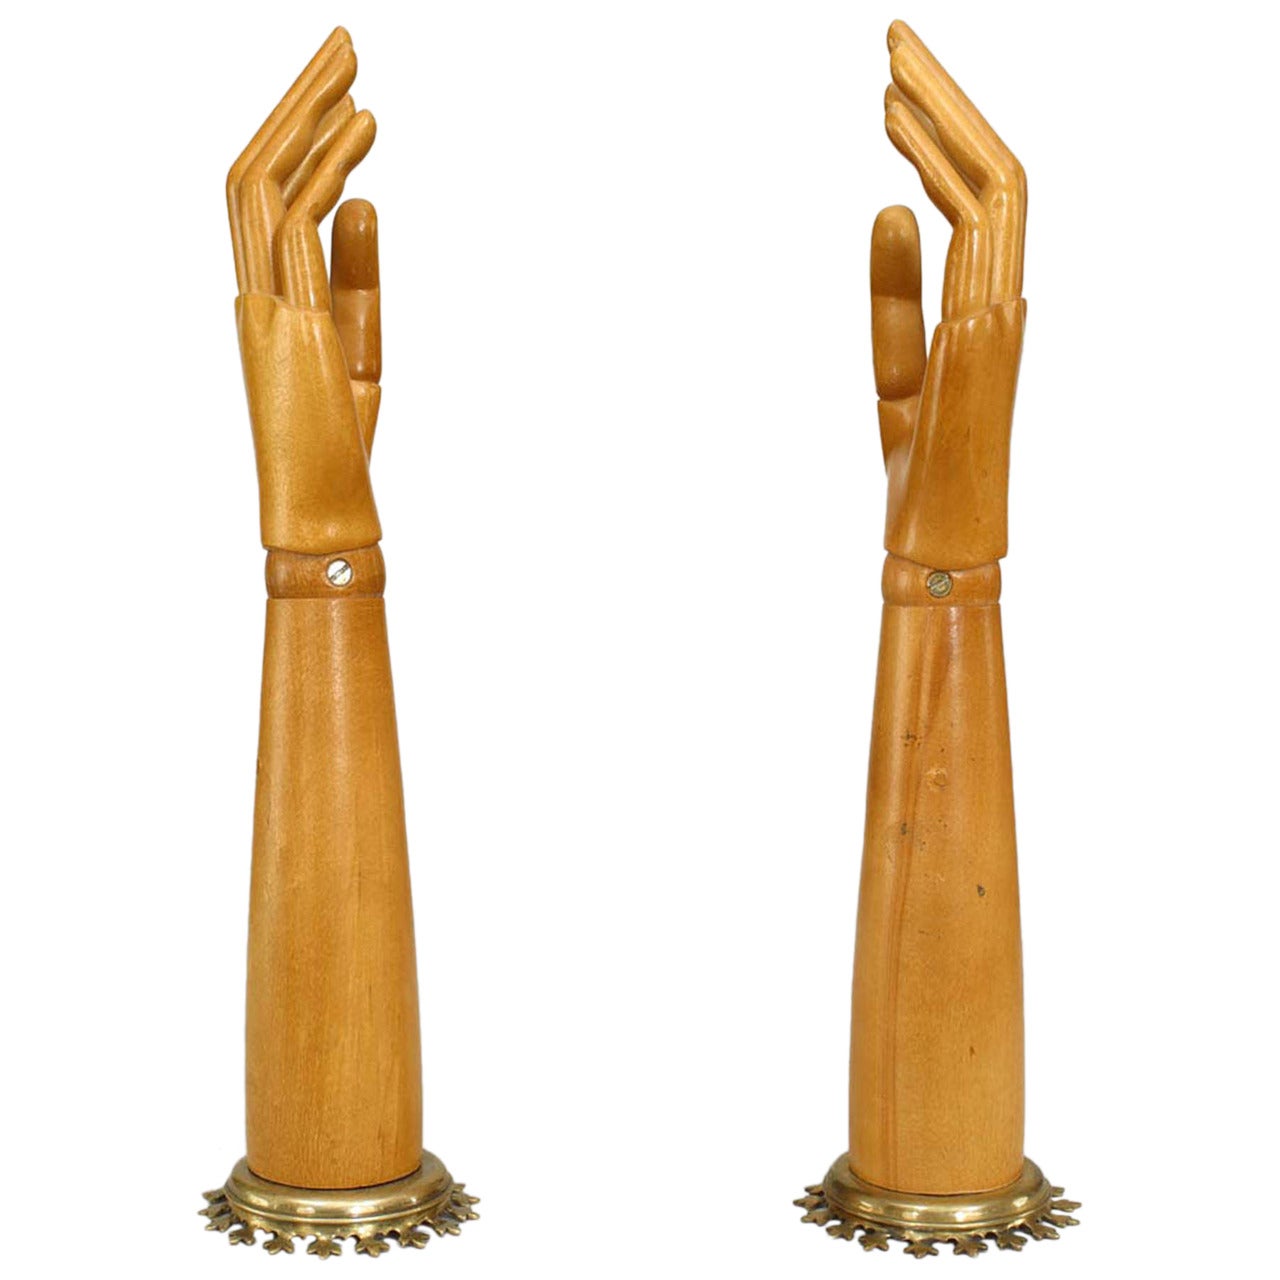 Pair of 19th Century English Carved Articulated Arm Sculptures